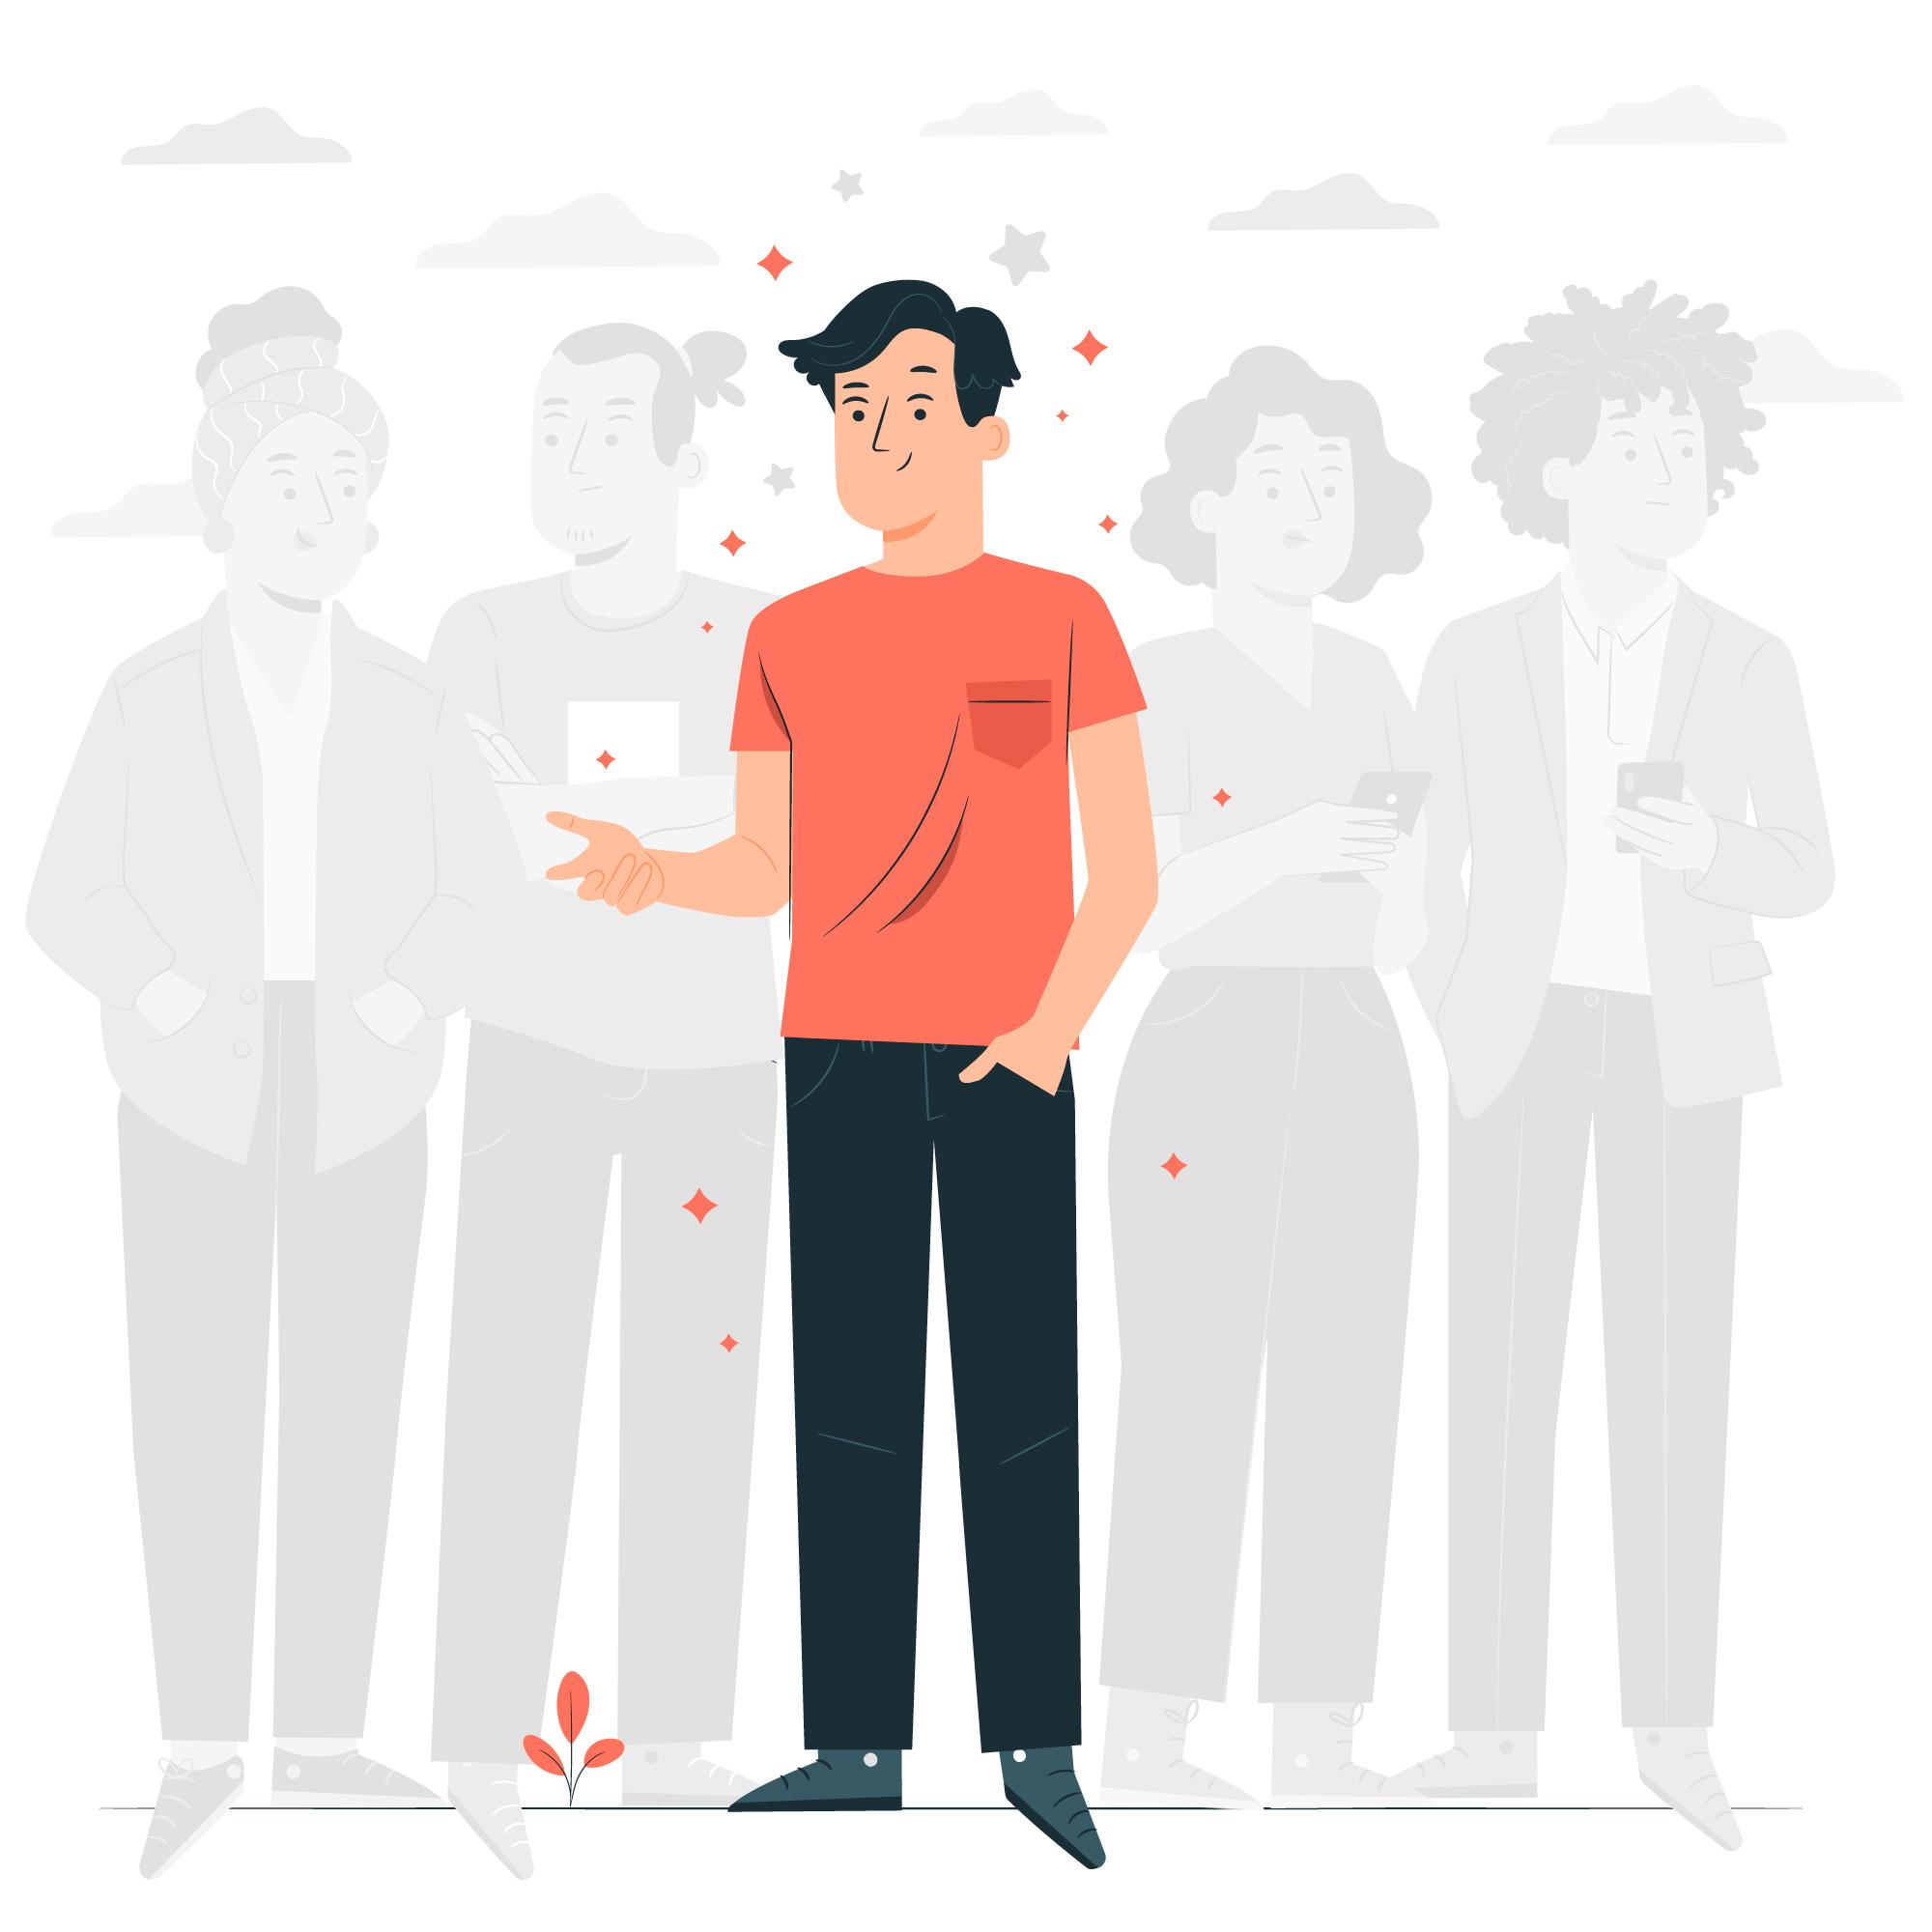 Stand Out: Illustration by https://www.freepik.com/stories